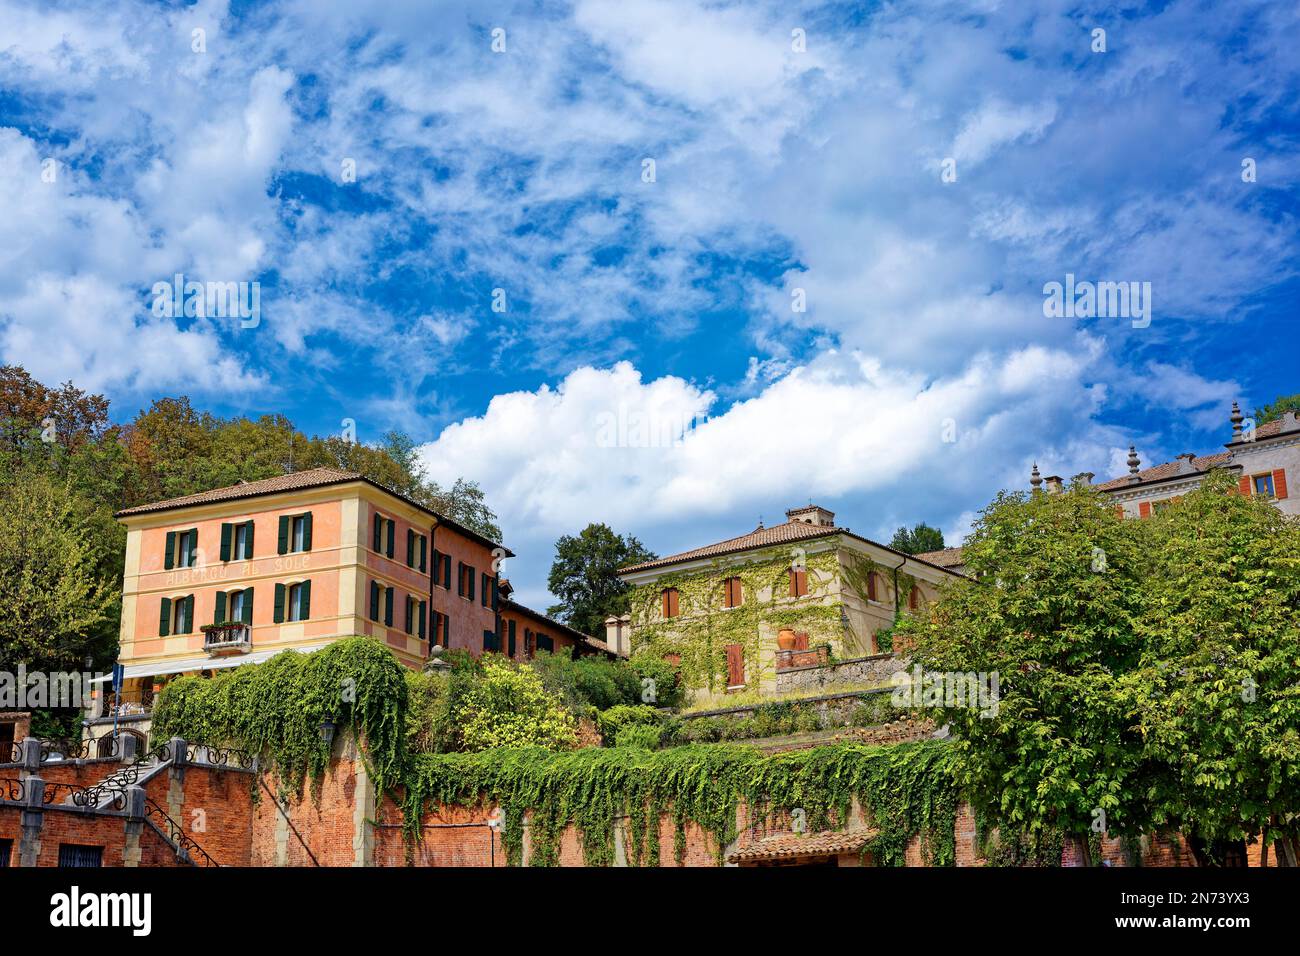 Picturesque house situated above a parking lot in the northern Italian town of Asolo Stock Photo